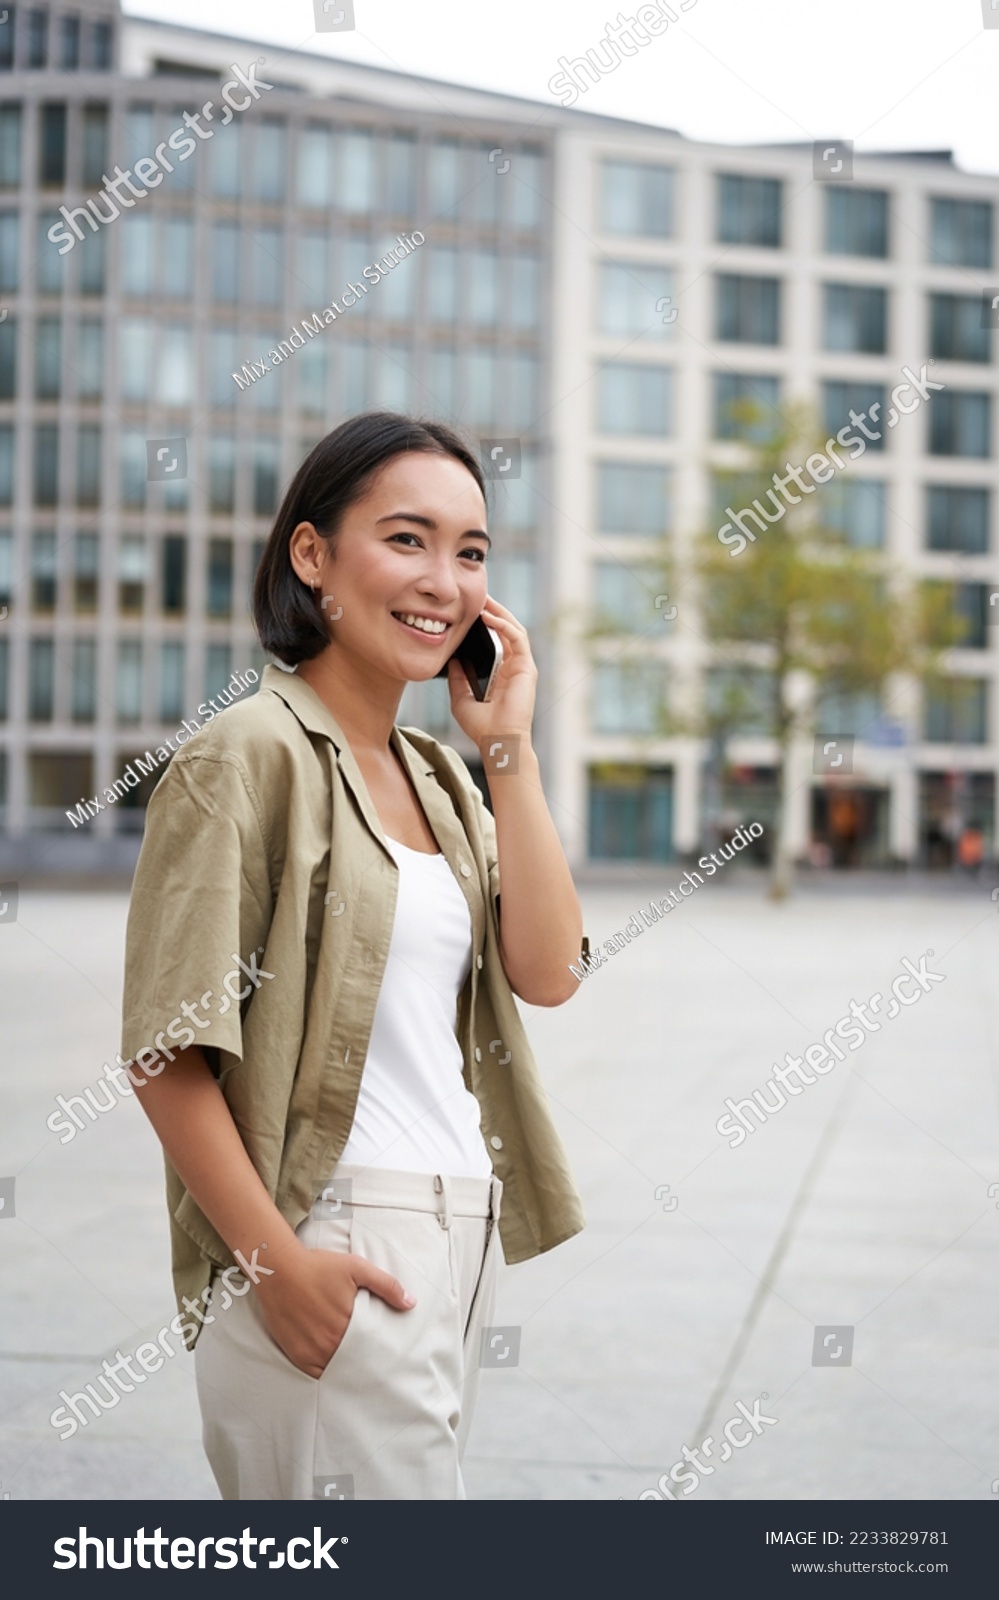 Modern young asian girl talks on mobile phone, uses telephone on city street. Woman smiling while calling someone on smartphone. #2233829781